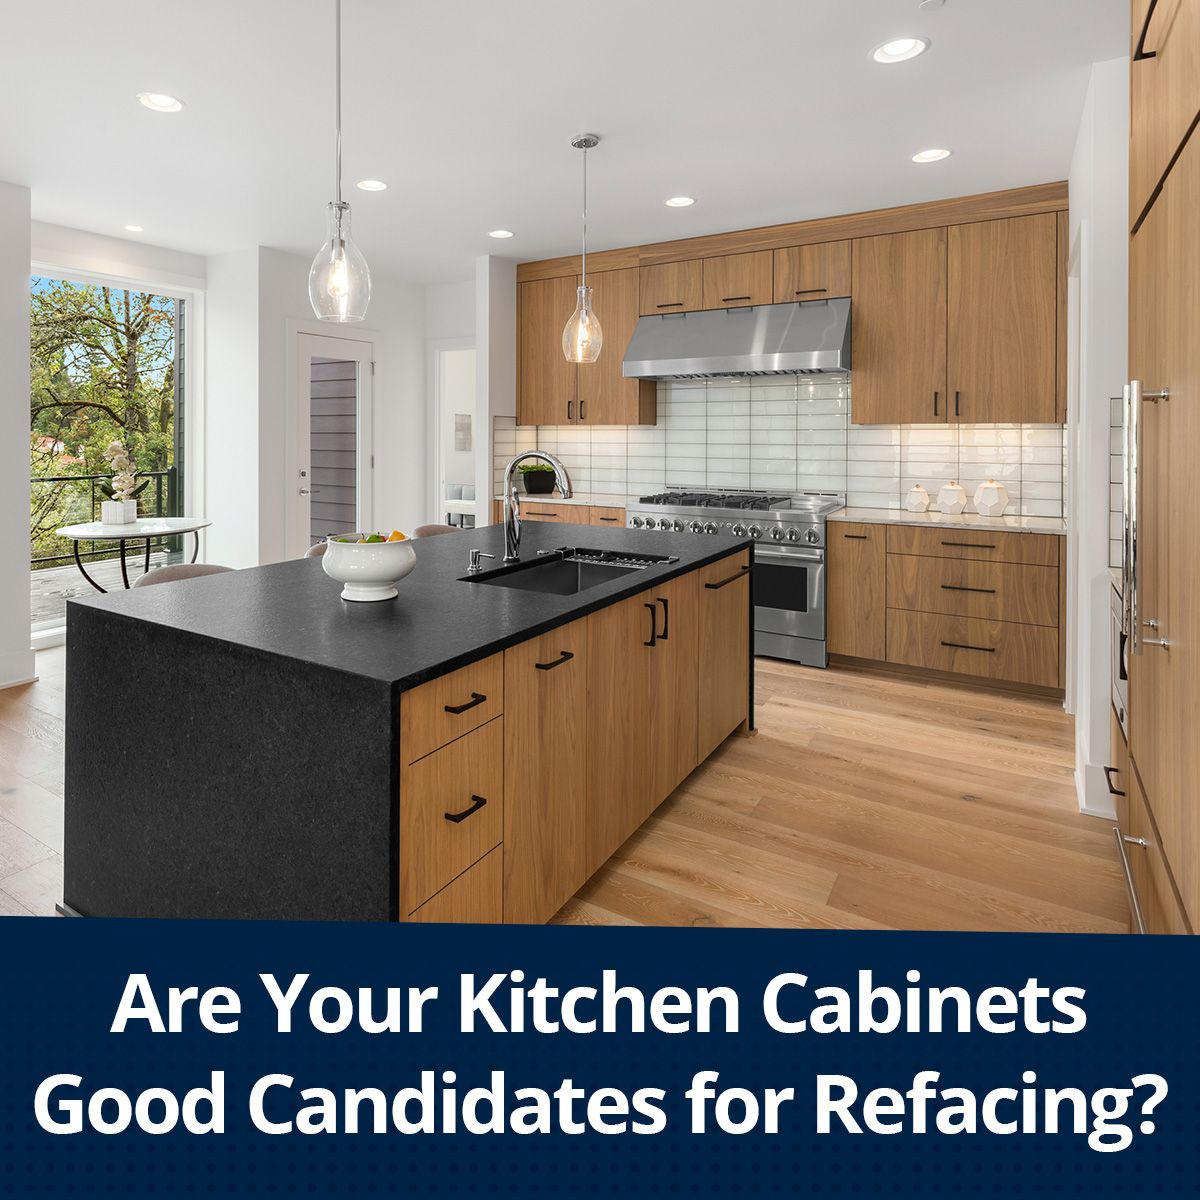 Are Your Kitchen Cabinets Good Candidates for Refacing?